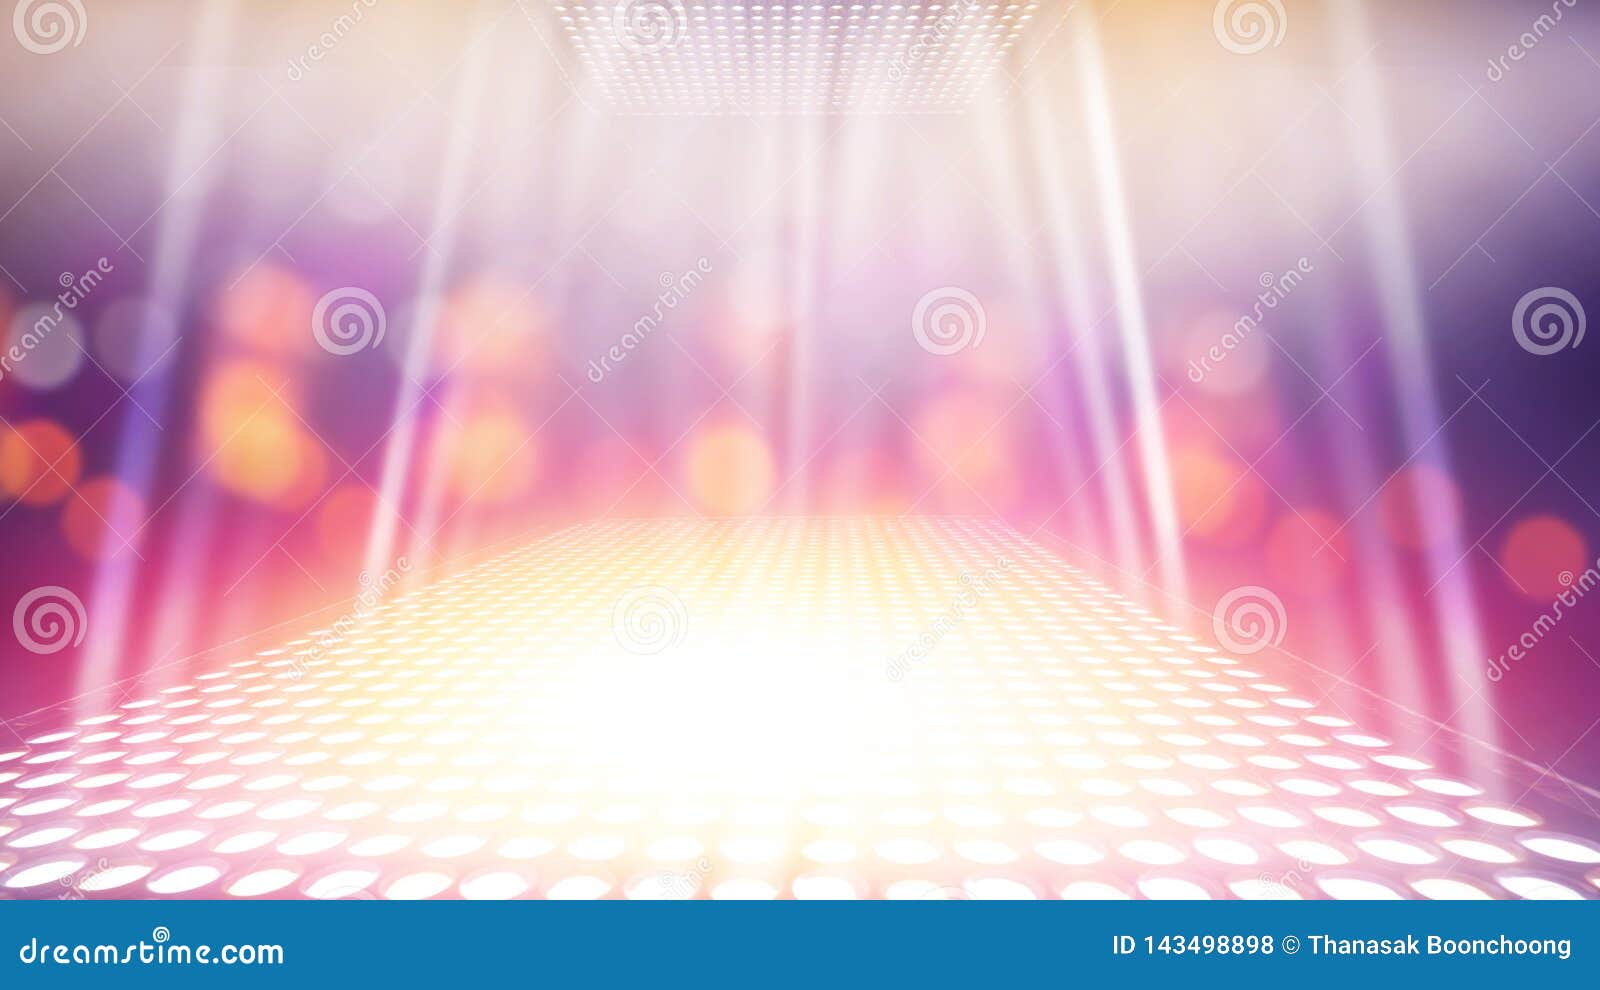 abstract illuminated light stage with colourful background